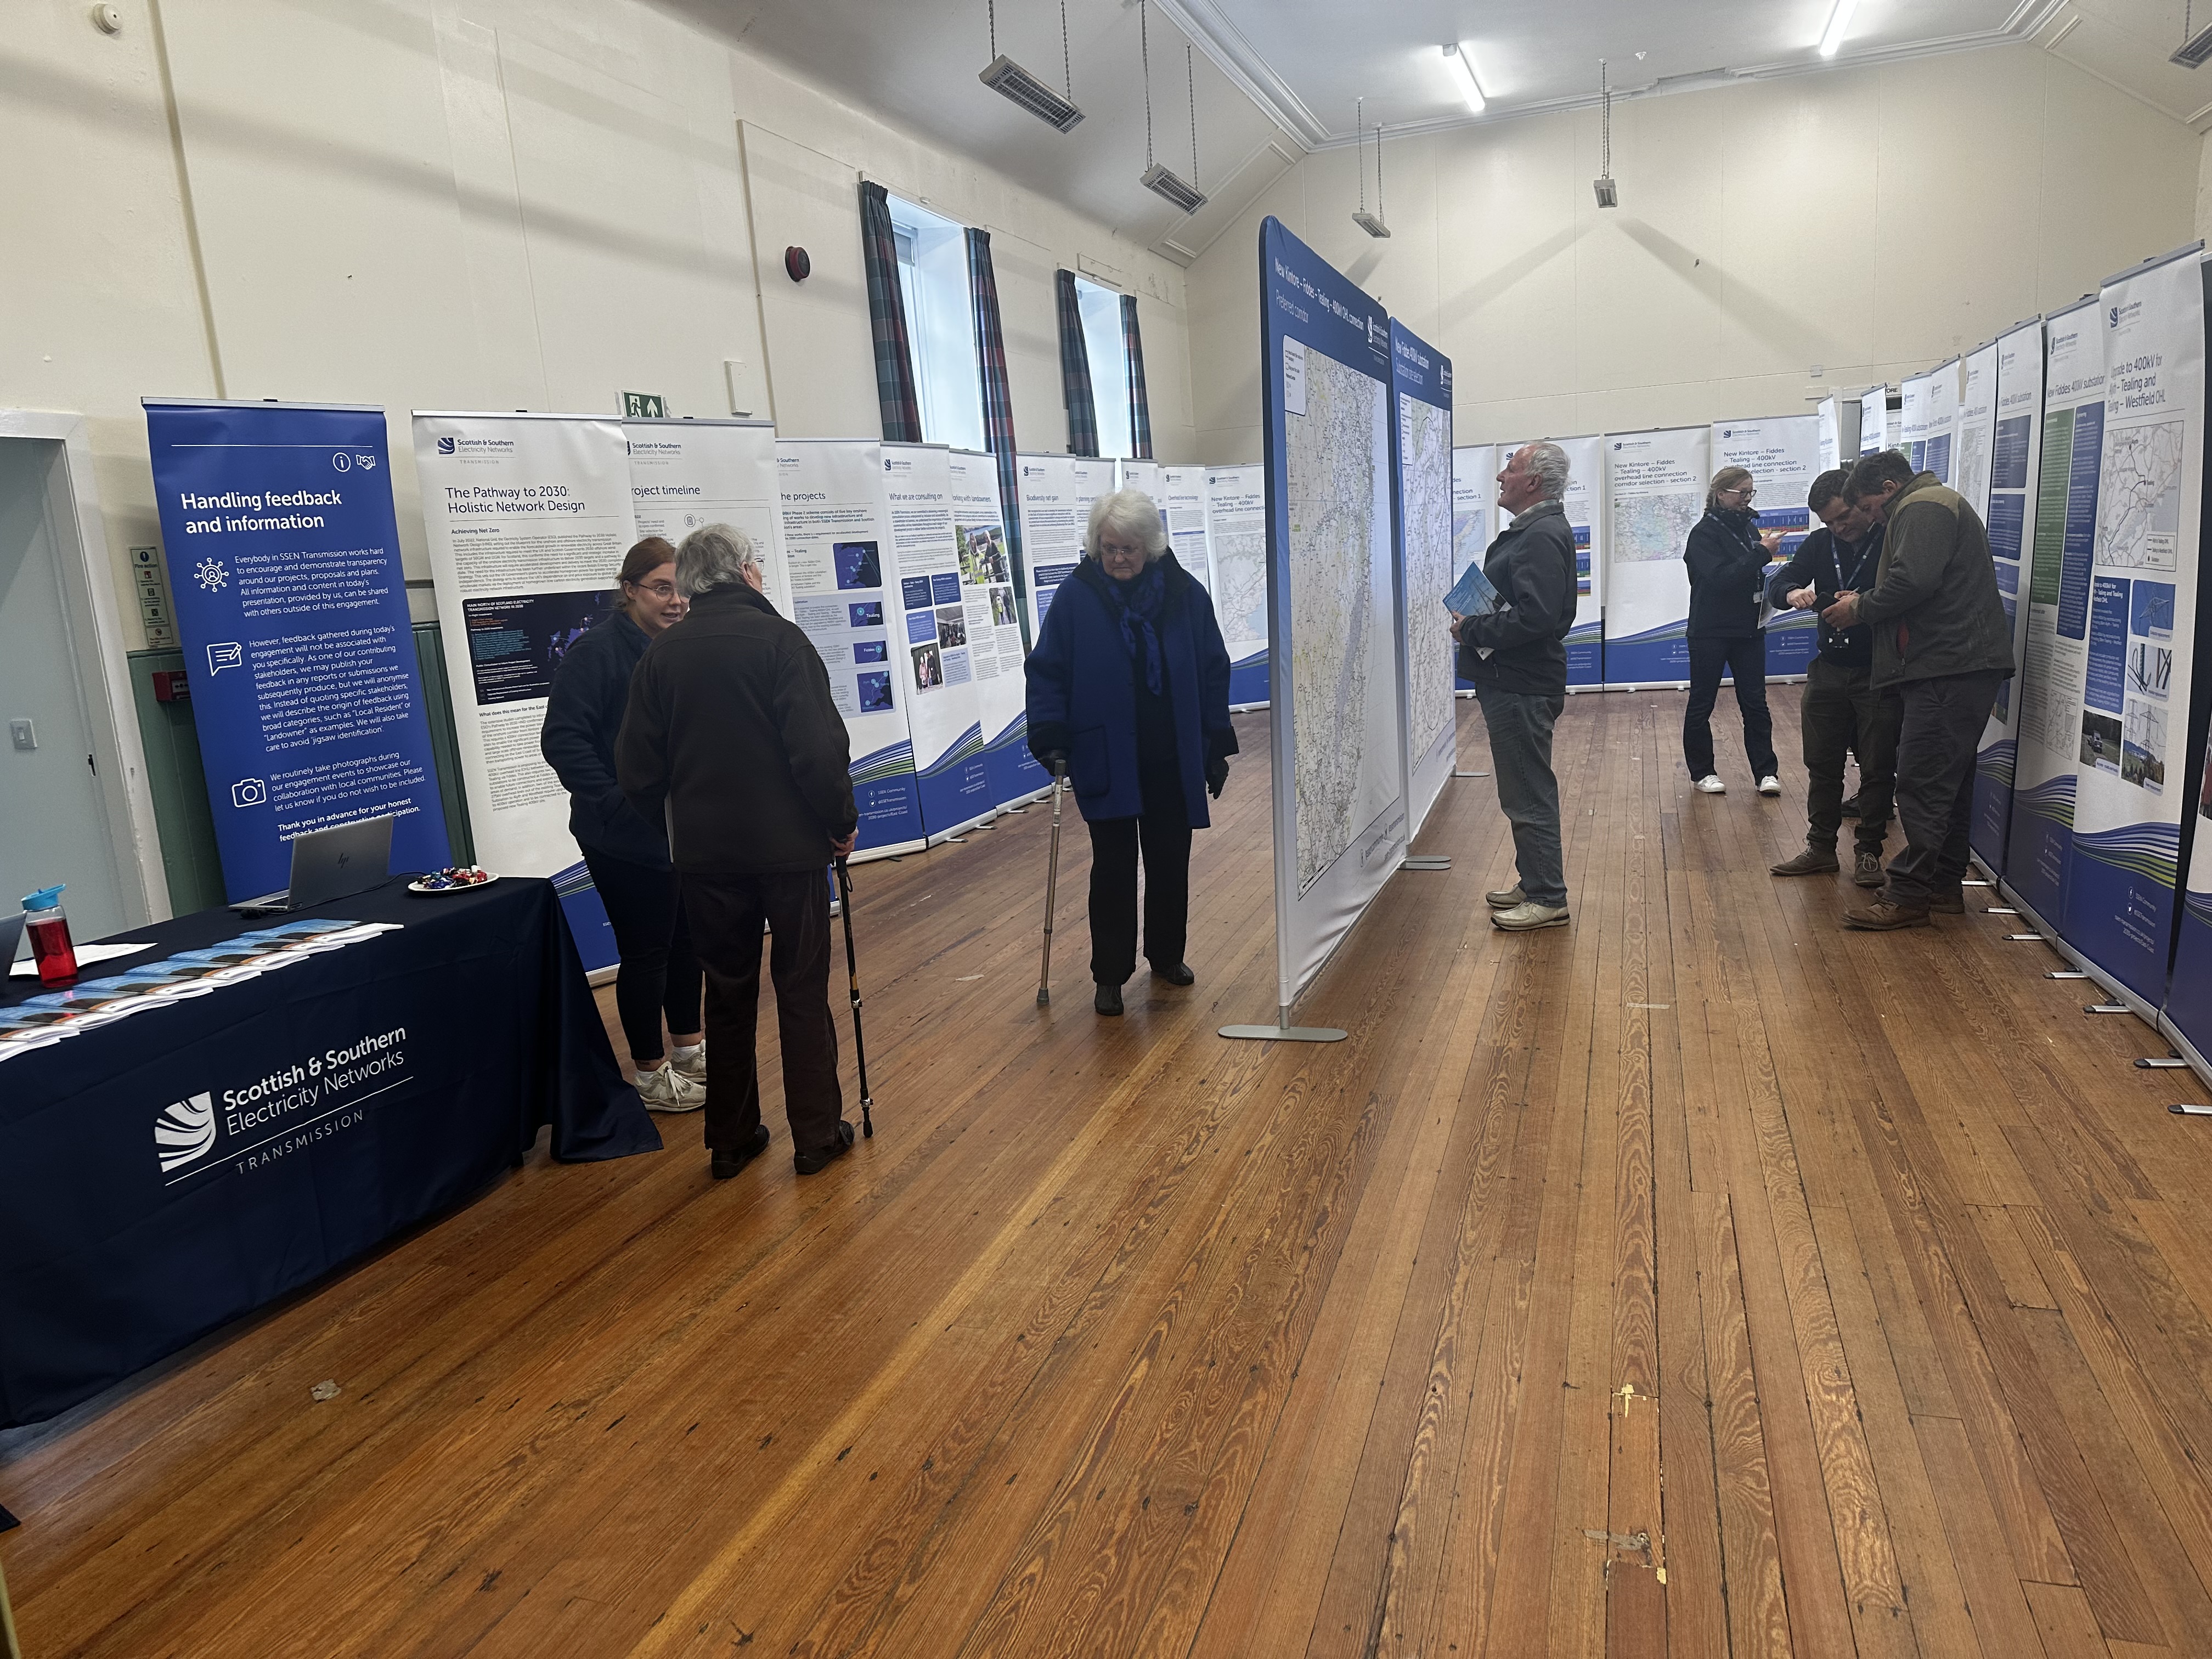 Members of the public and SSEN Transmission employees examining project posters in a hall.